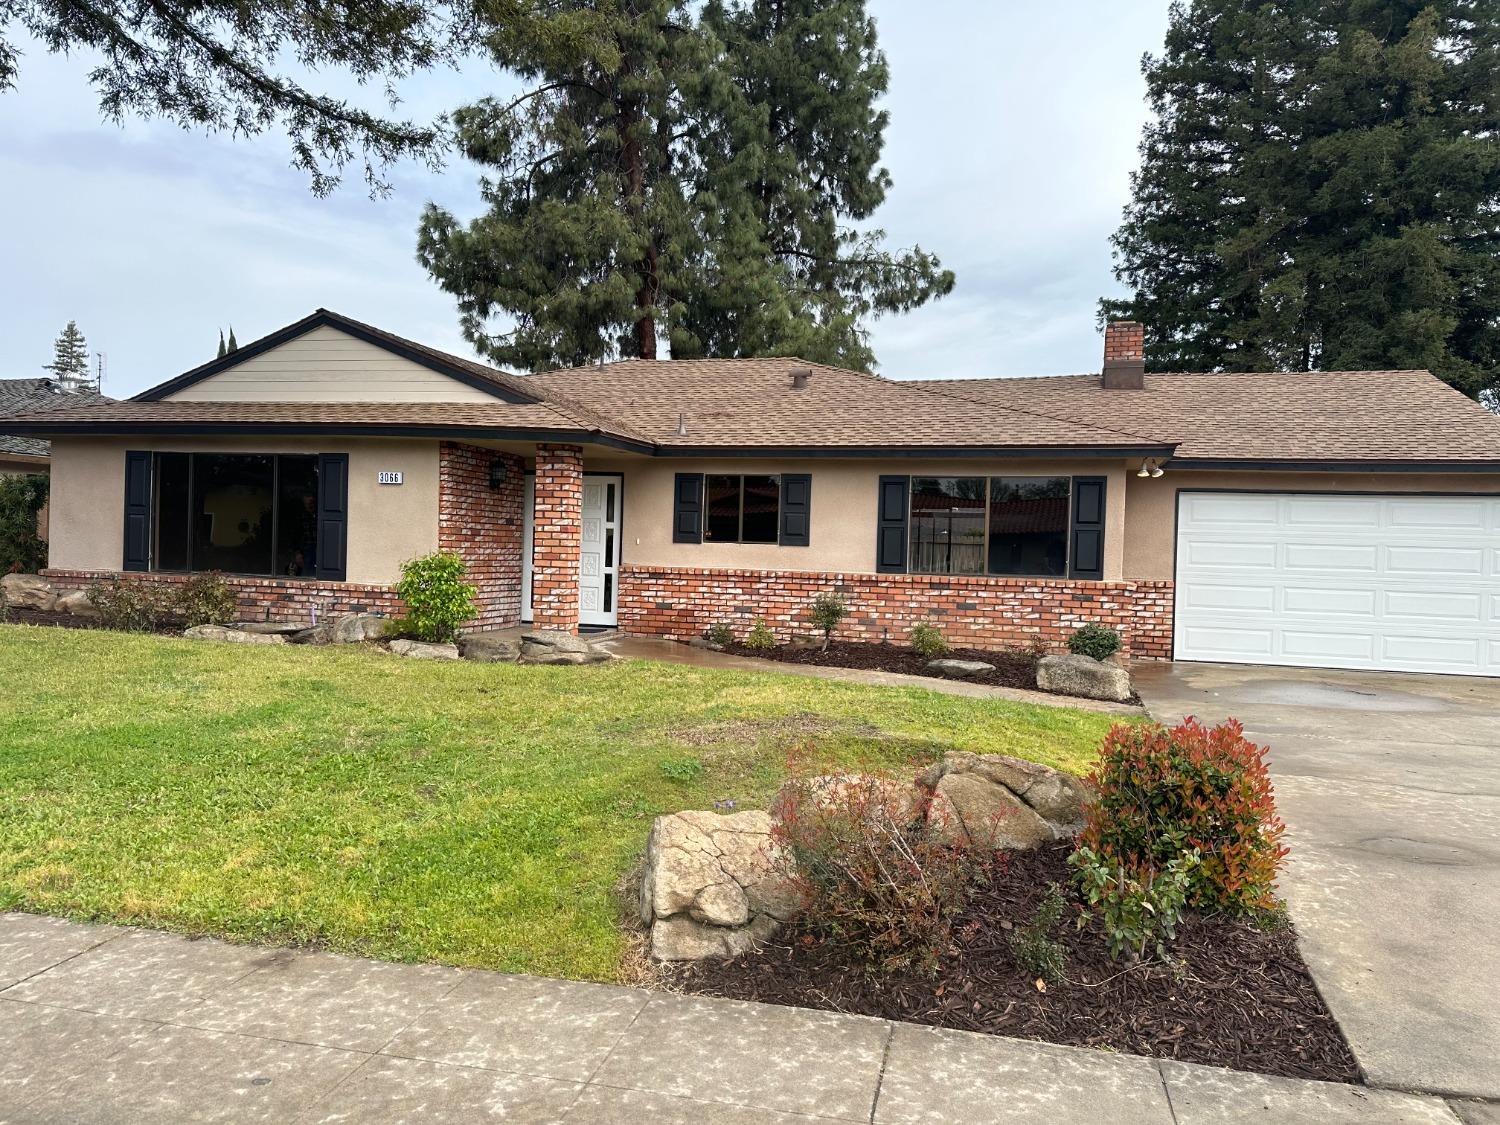 Photo of 3066 W Barstow Ave in Fresno, CA